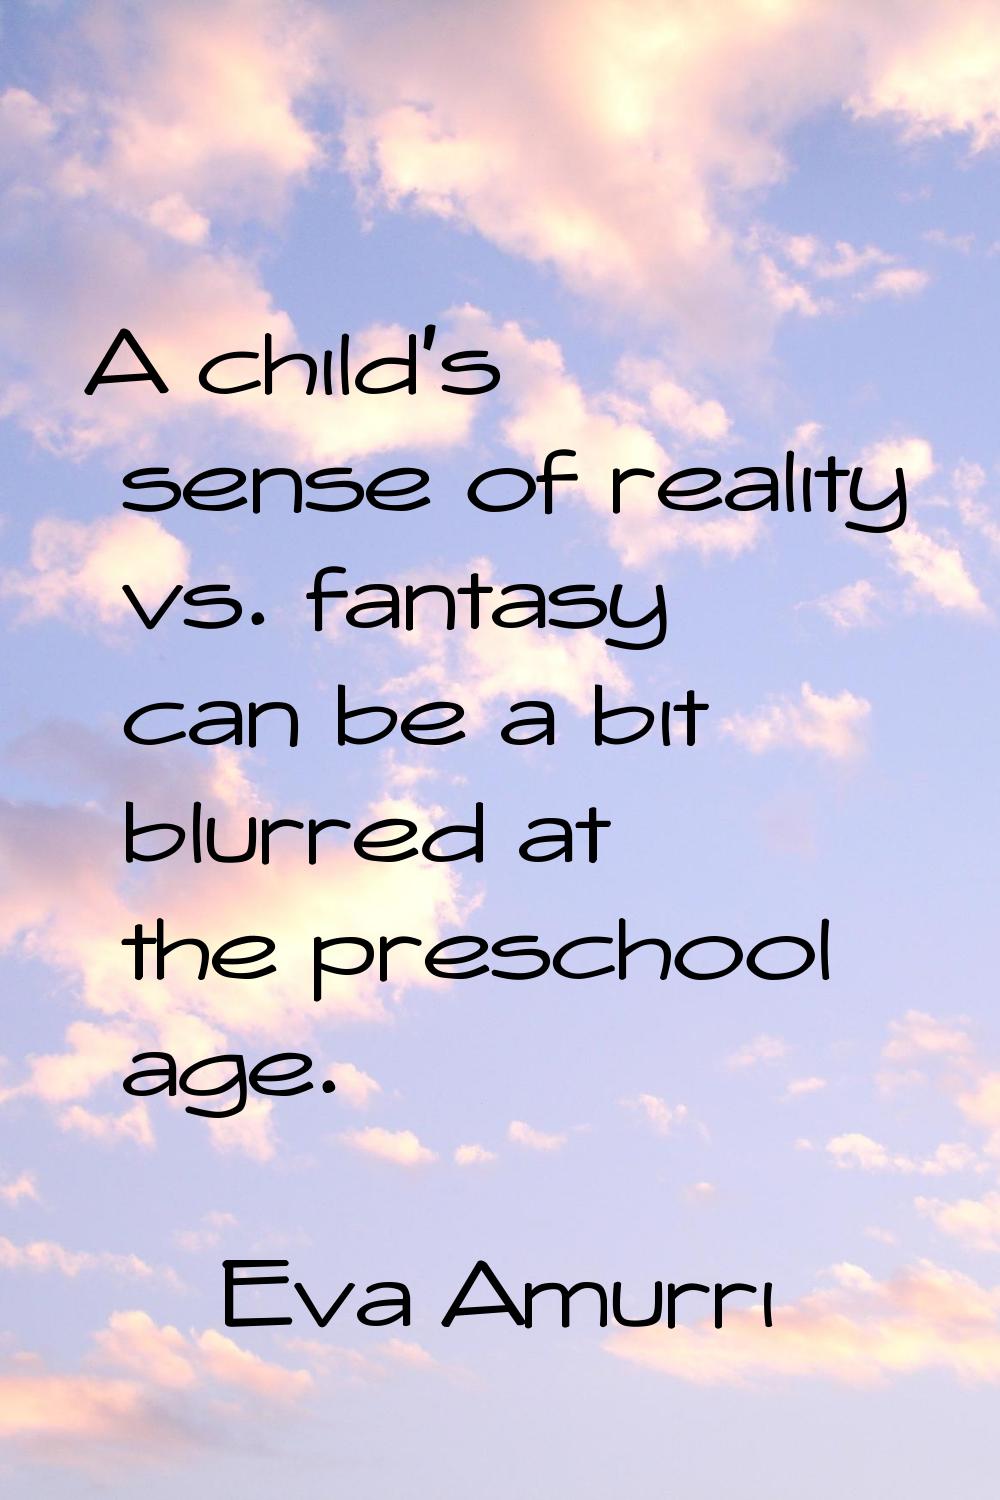 A child's sense of reality vs. fantasy can be a bit blurred at the preschool age.